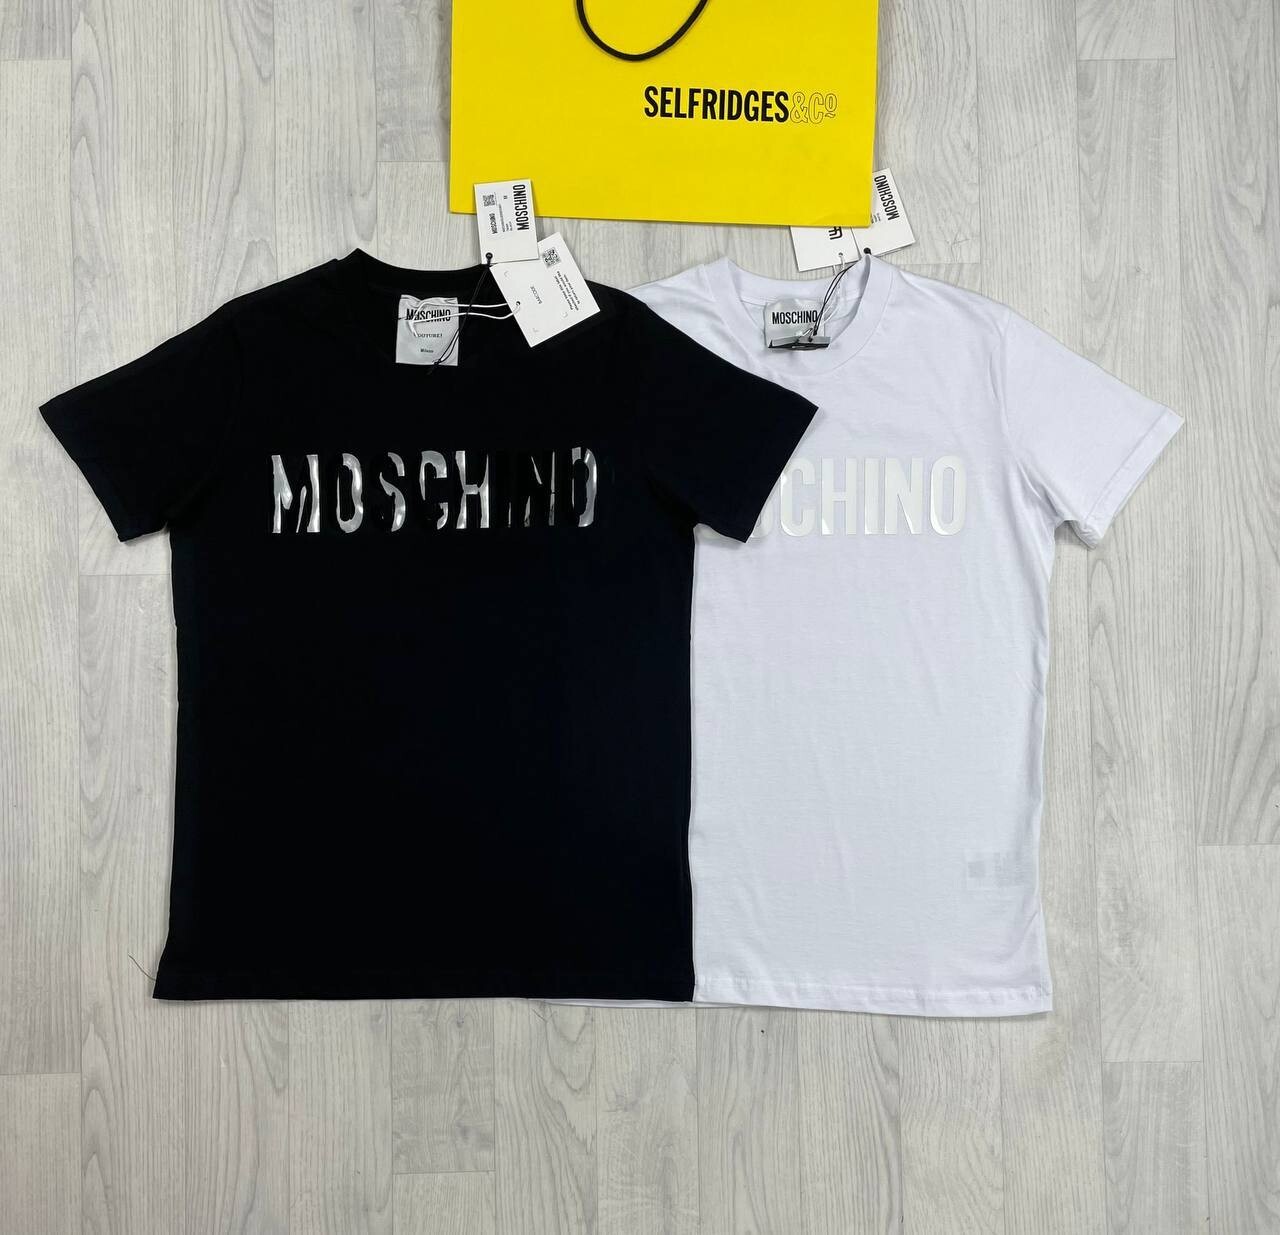 Moschino T-shirts in Black and White color